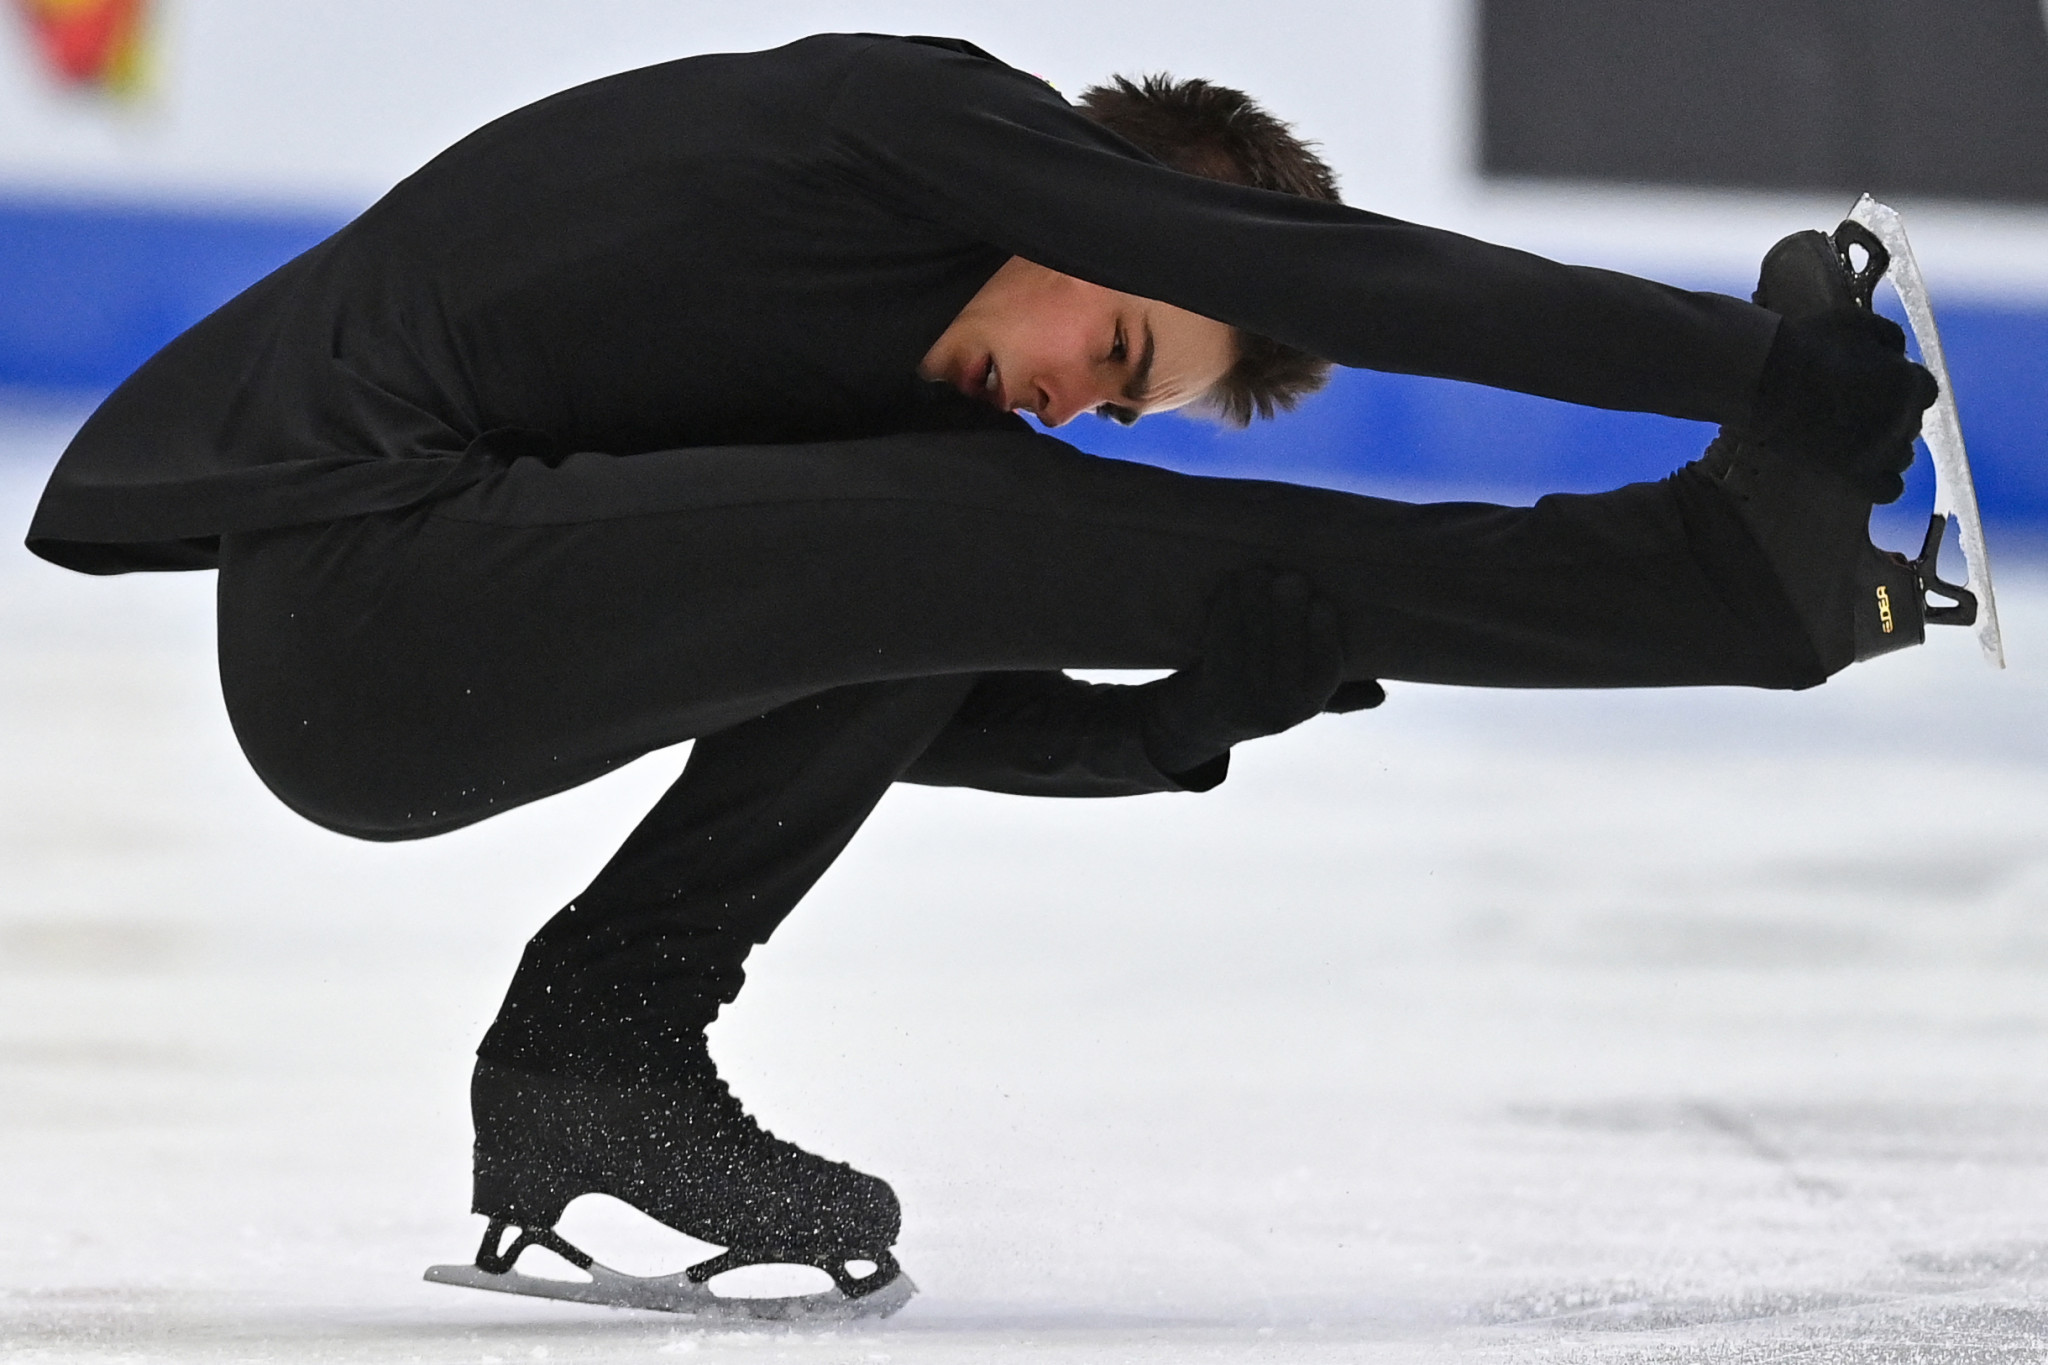 Arlet Levandi of Estonia claimed boys' figure skating gold with an impressive display at the Winter EYOF ©Getty Images